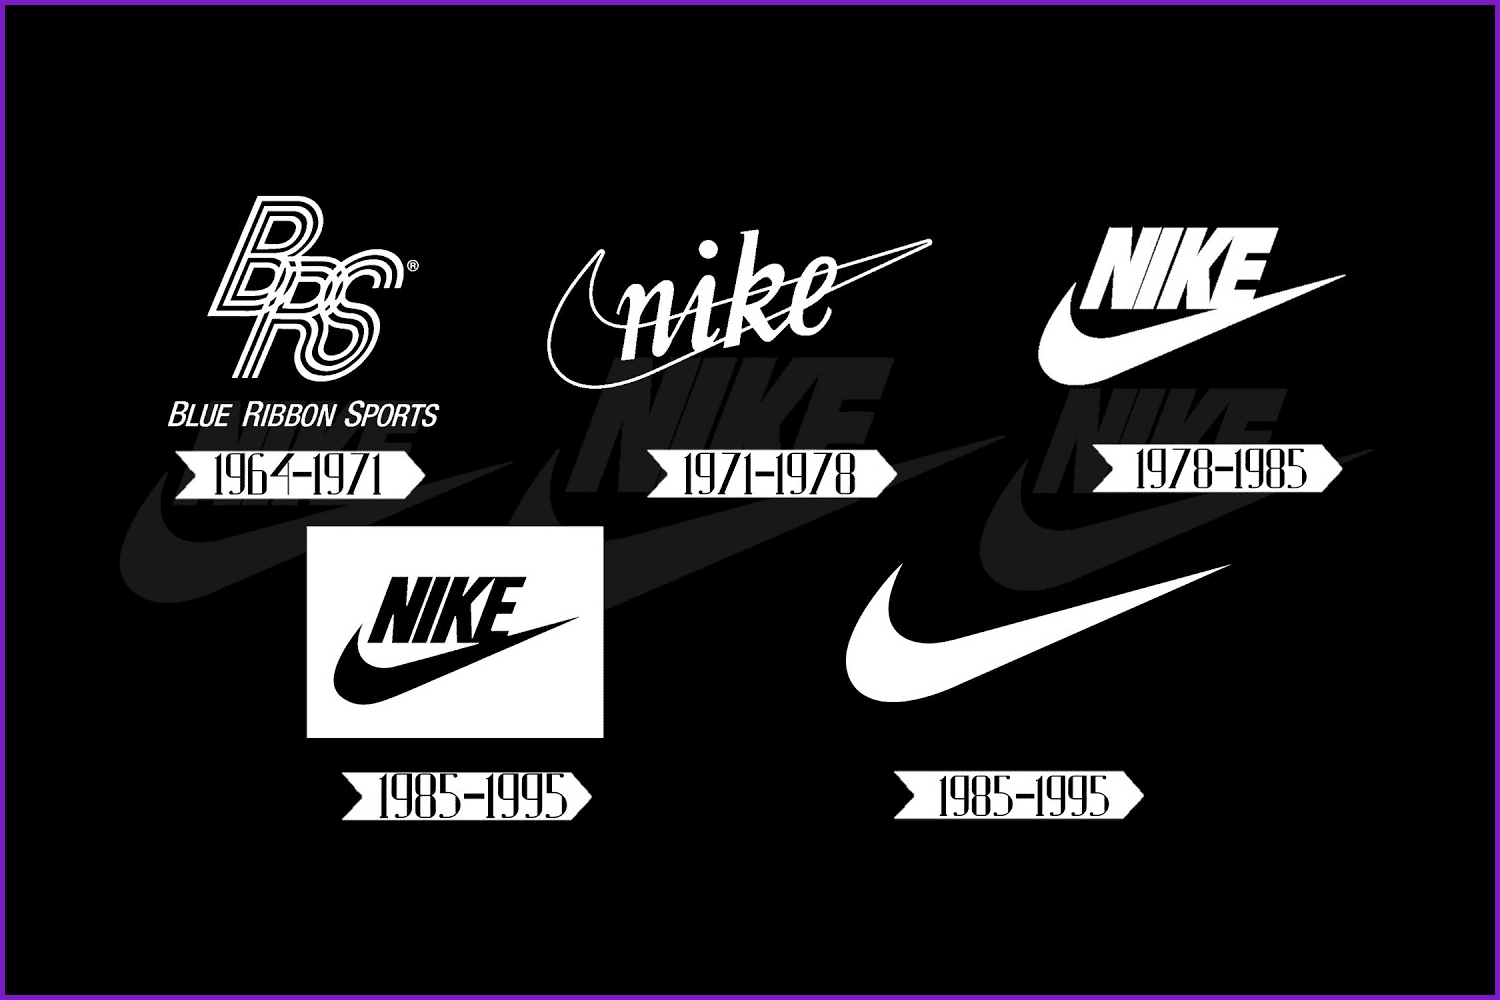 Frustrante cálmese Diariamente Meaning, History, and Evolution of the Nike Logo